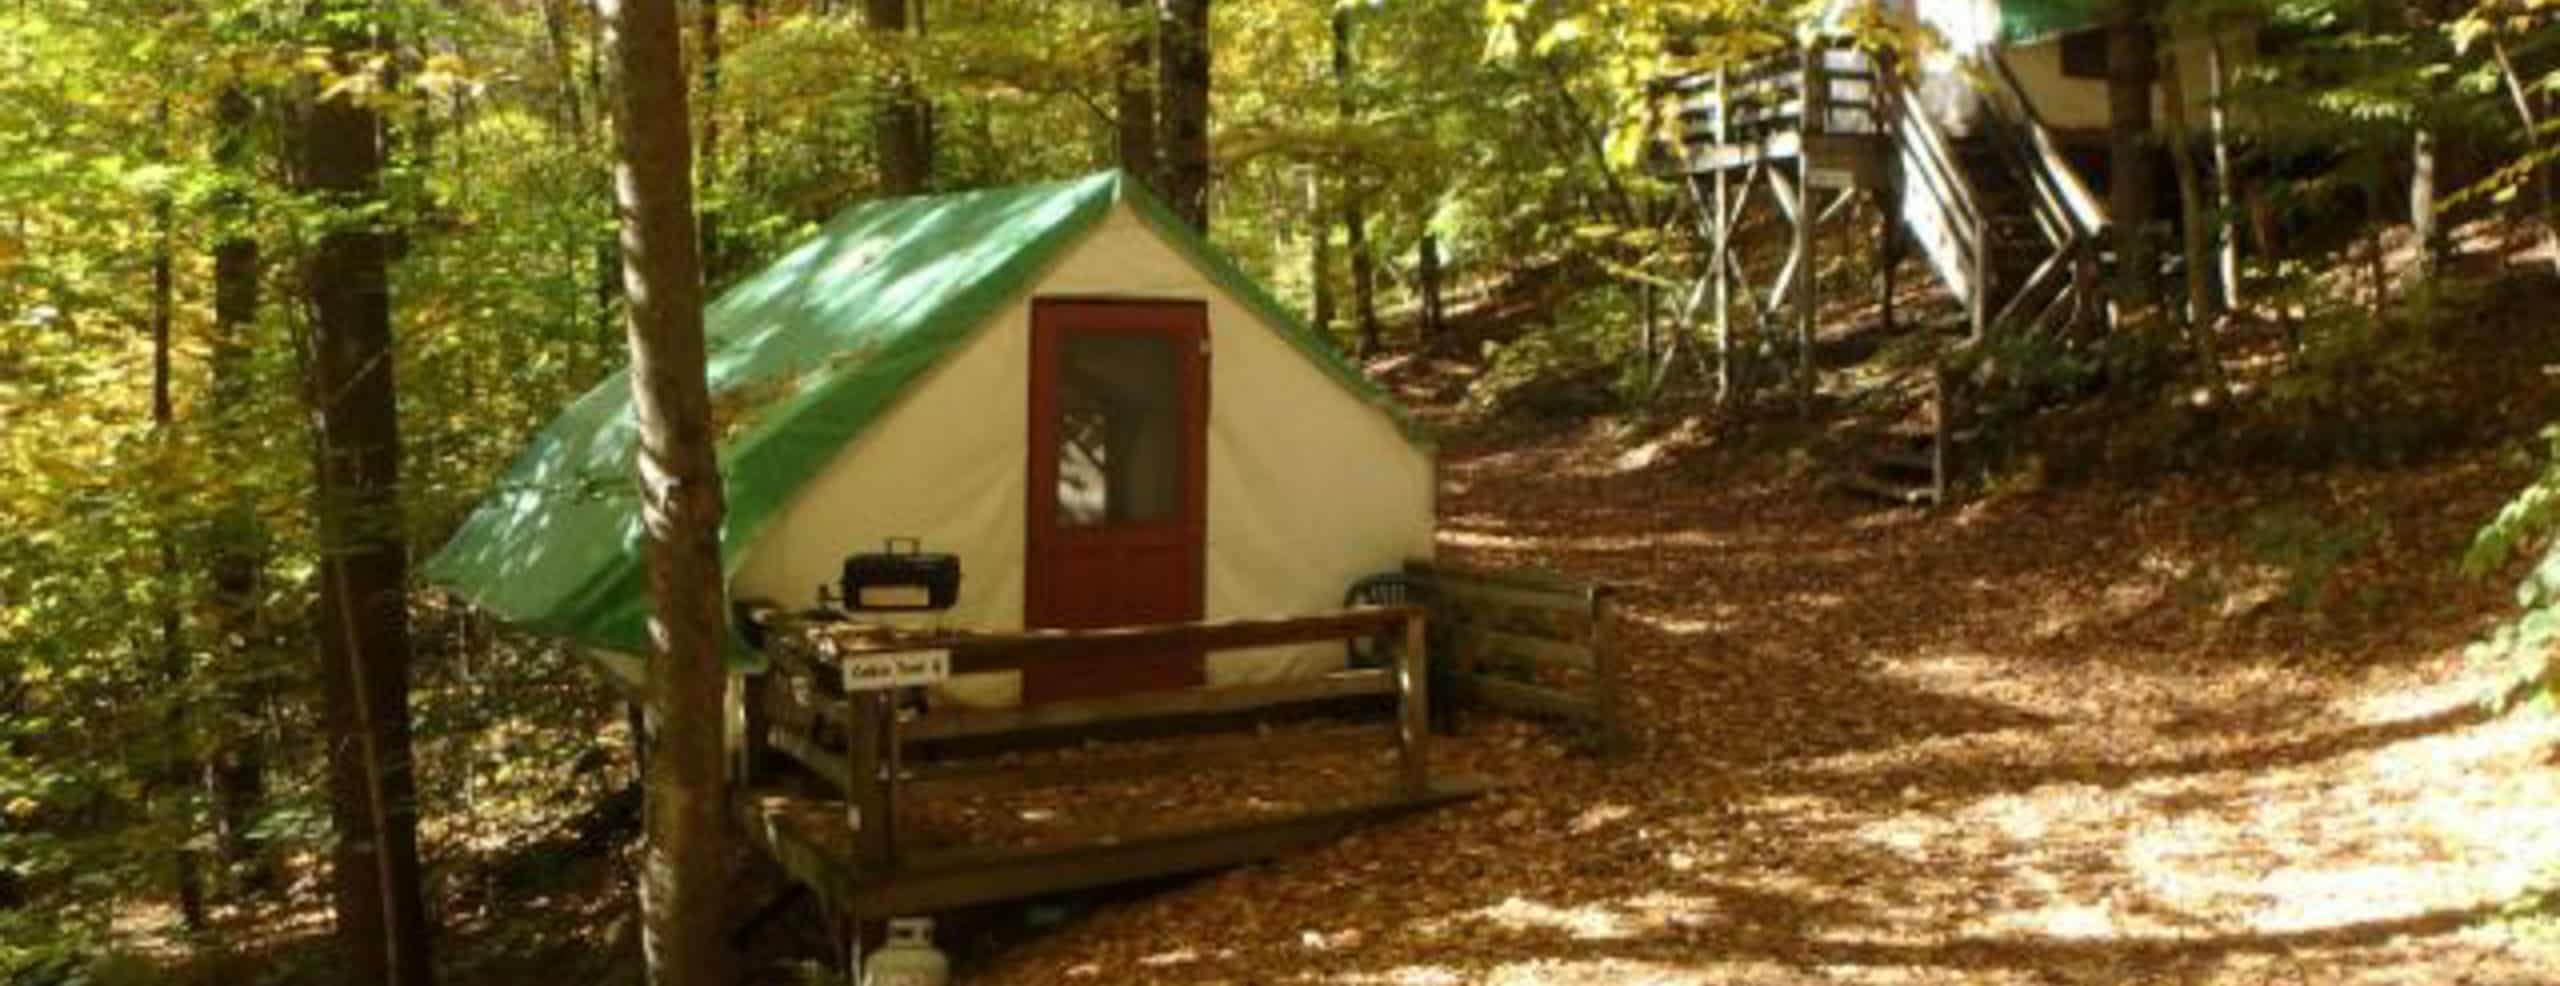 Cabin tent in the woods